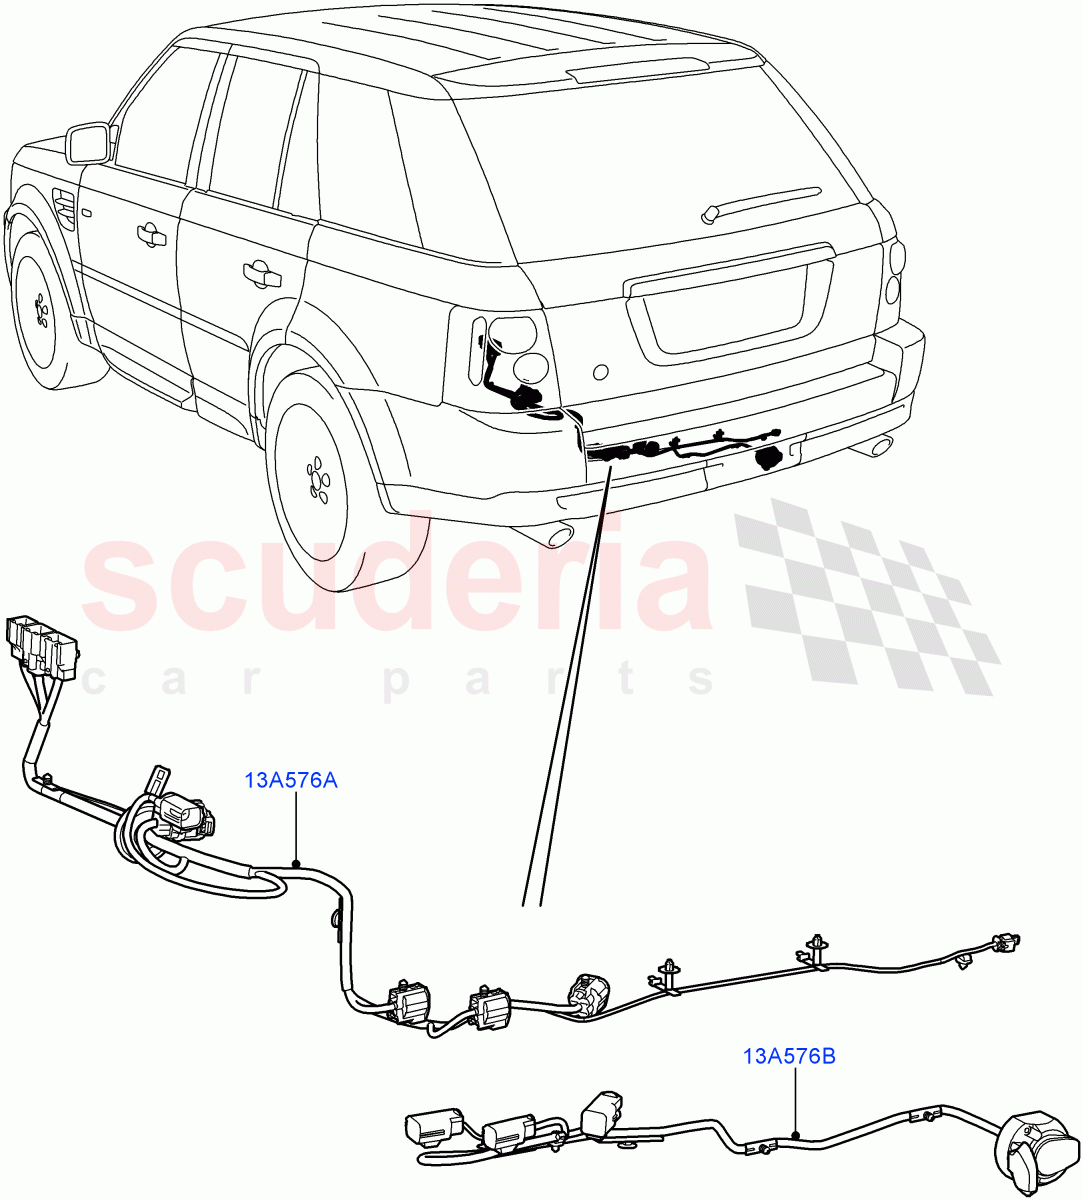 Electrical Wiring - Body And Rear(Towing)((V)FROMAA000001) of Land Rover Land Rover Range Rover Sport (2010-2013) [3.6 V8 32V DOHC EFI Diesel]